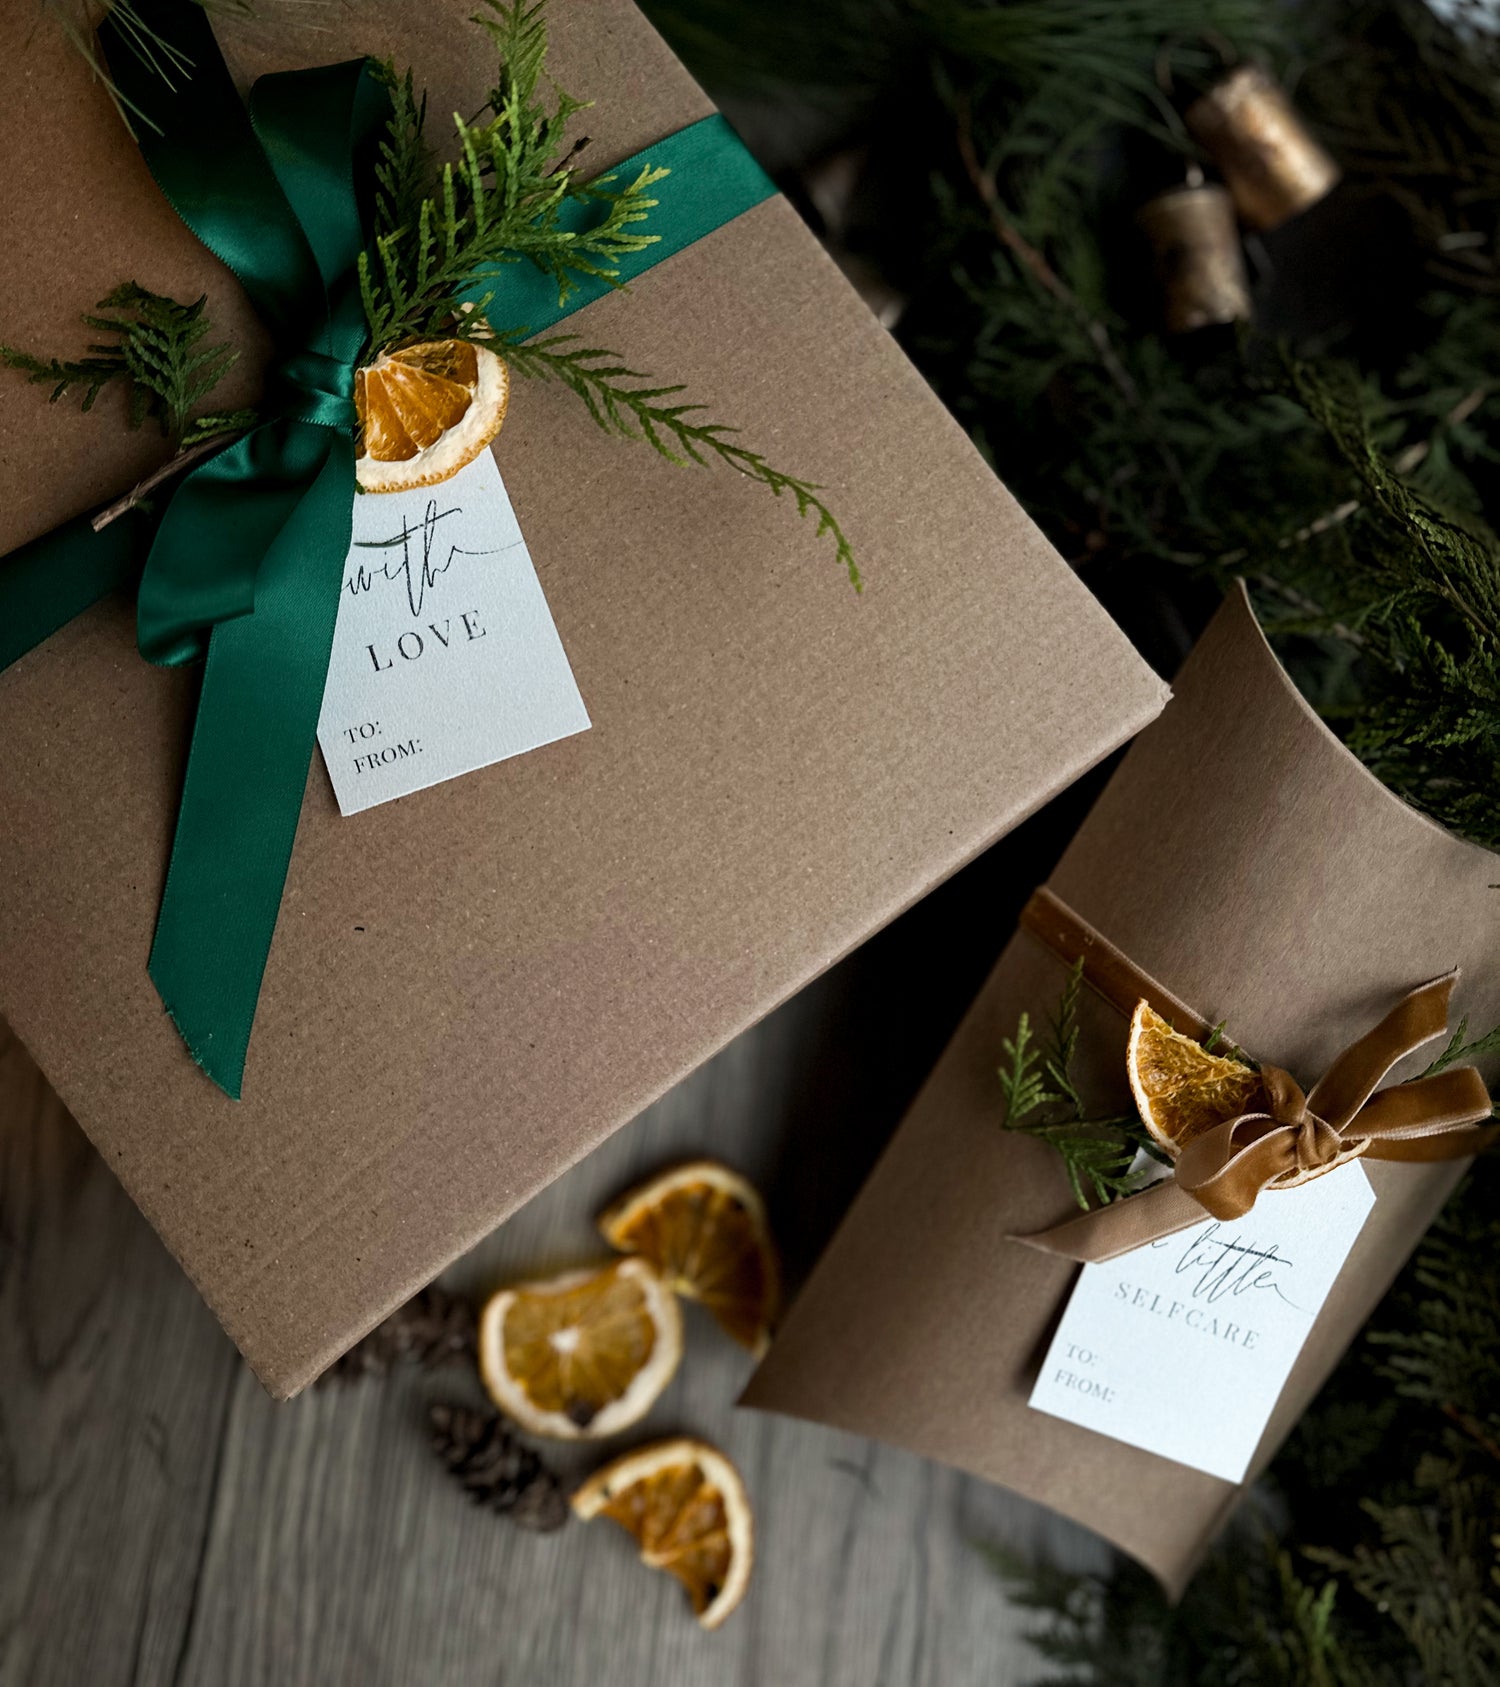 curated gift bundles